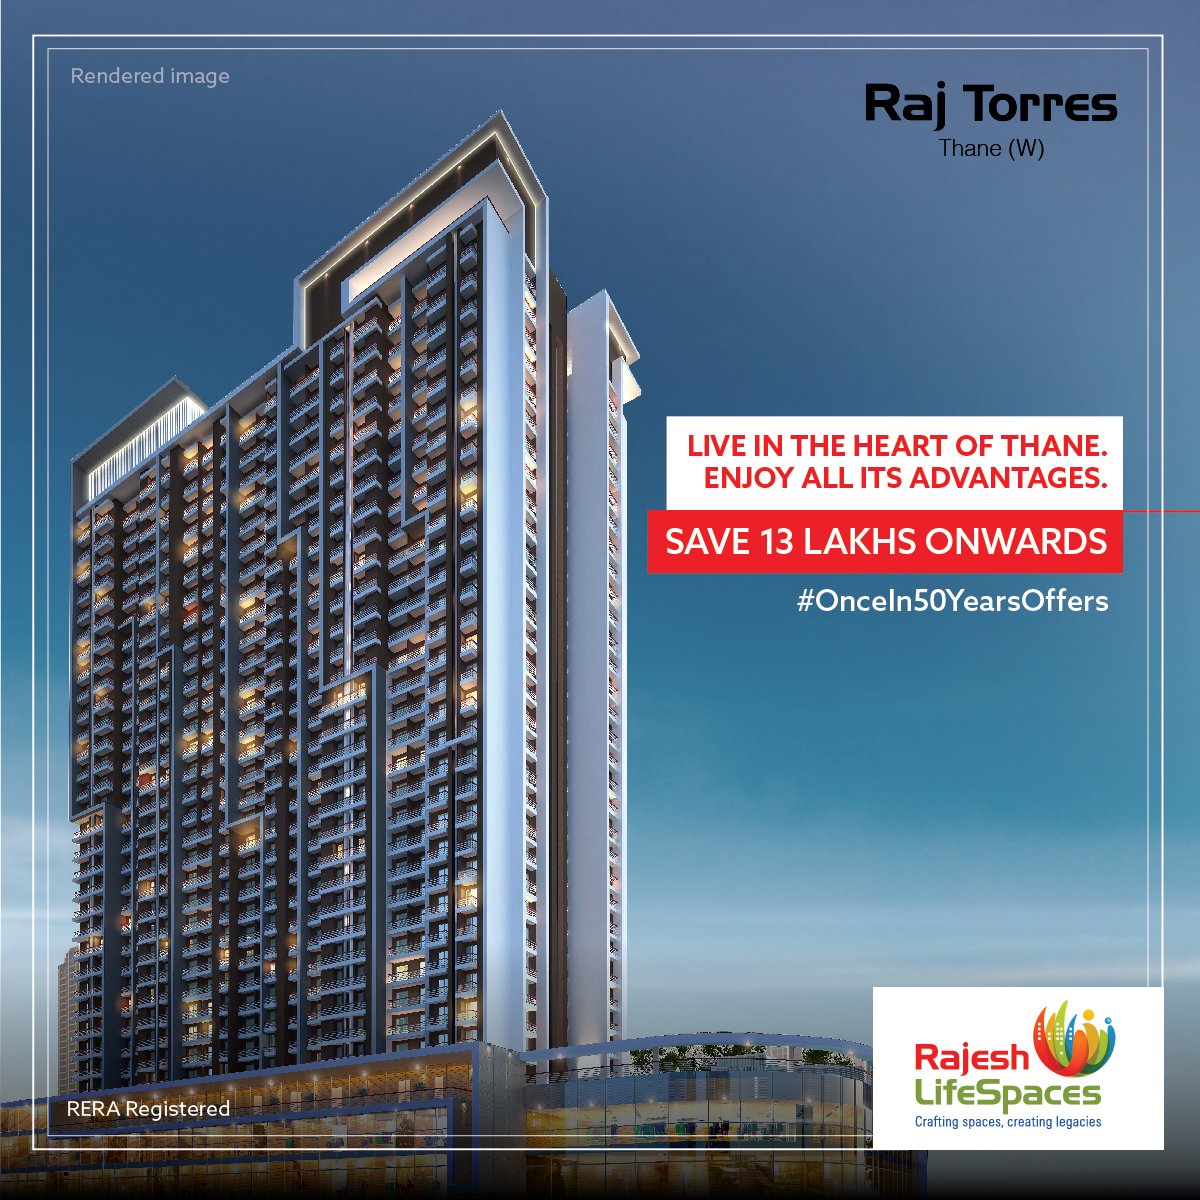 #PracticalLiving is at the soul of #RajTorres in #Thane. #OnceIn50YearsOffers from #RajeshLifeSpaces.
Visit: goo.gl/kdV8Td